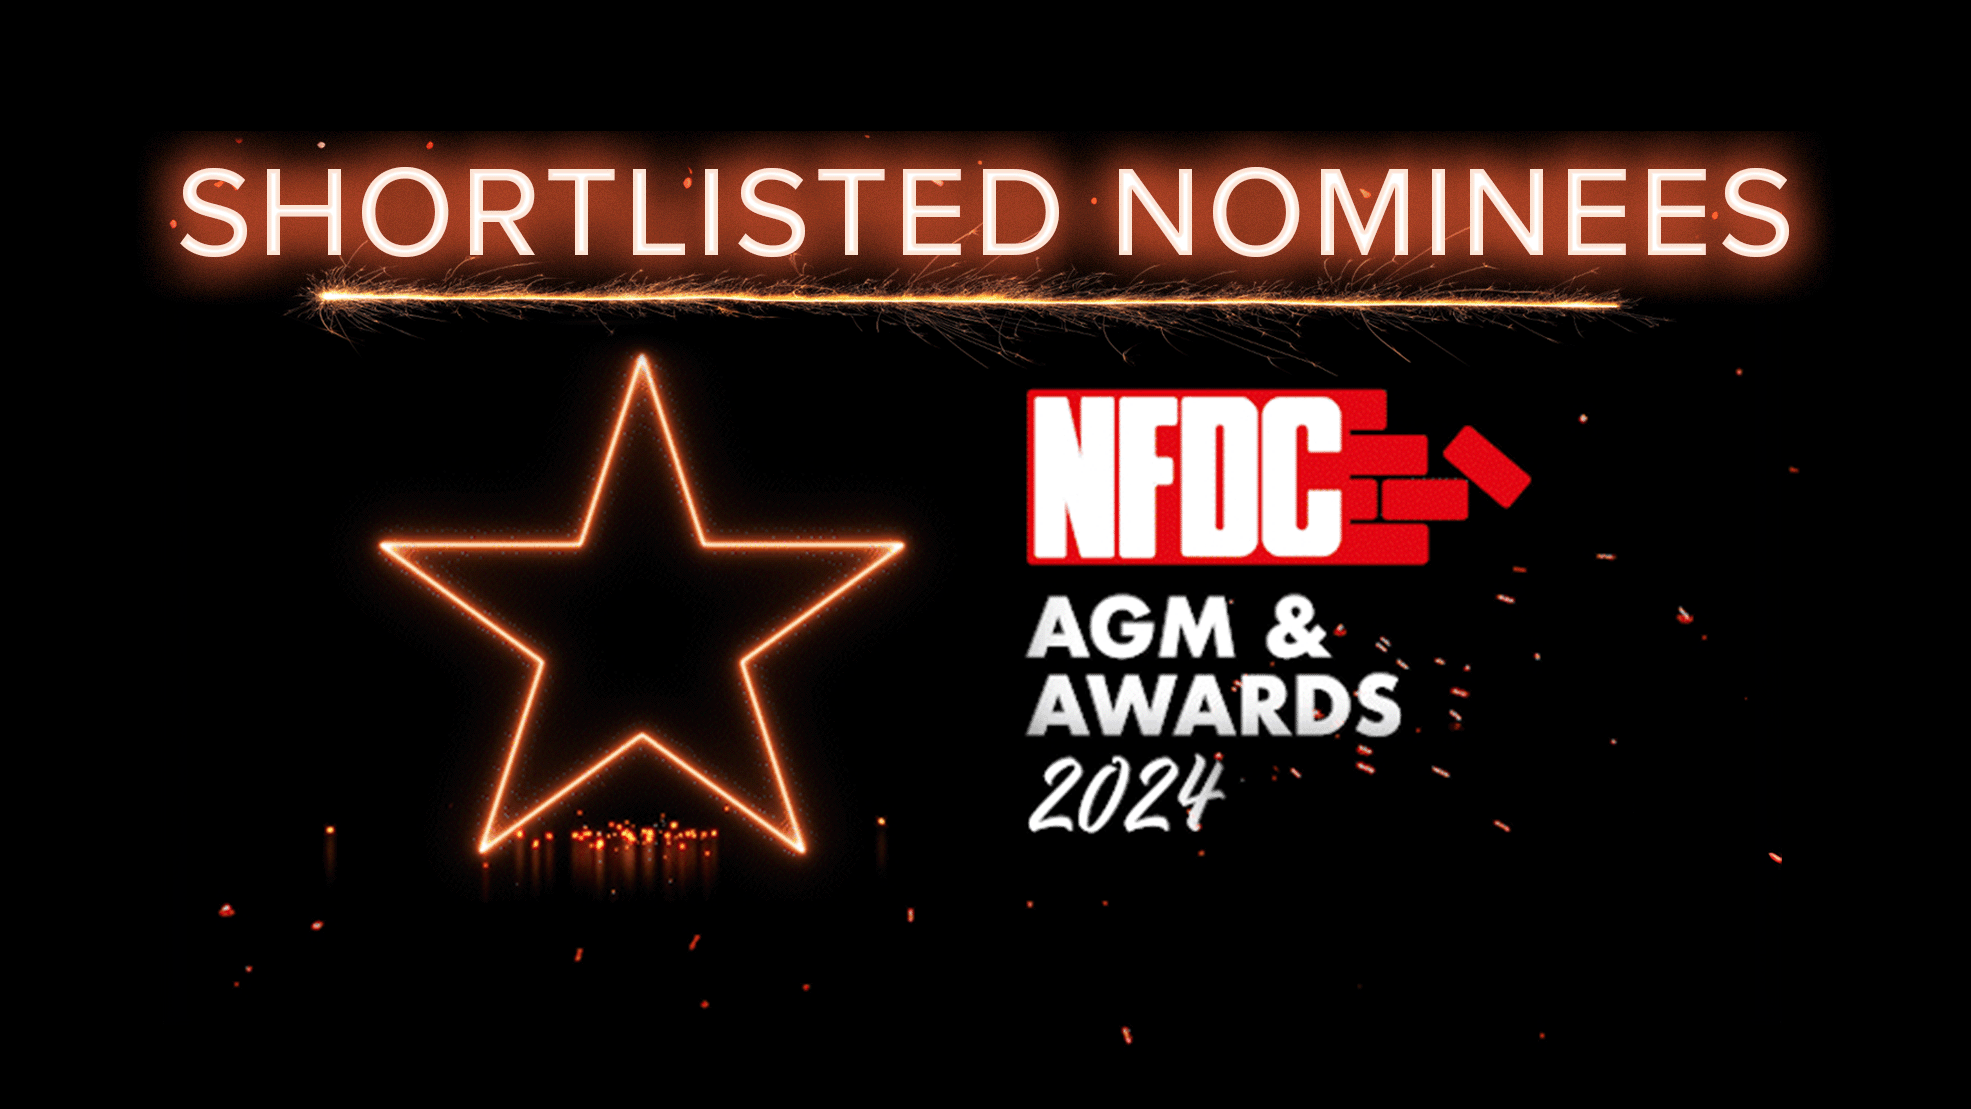 Shortlisted Nominees – NFDC Awards 2024